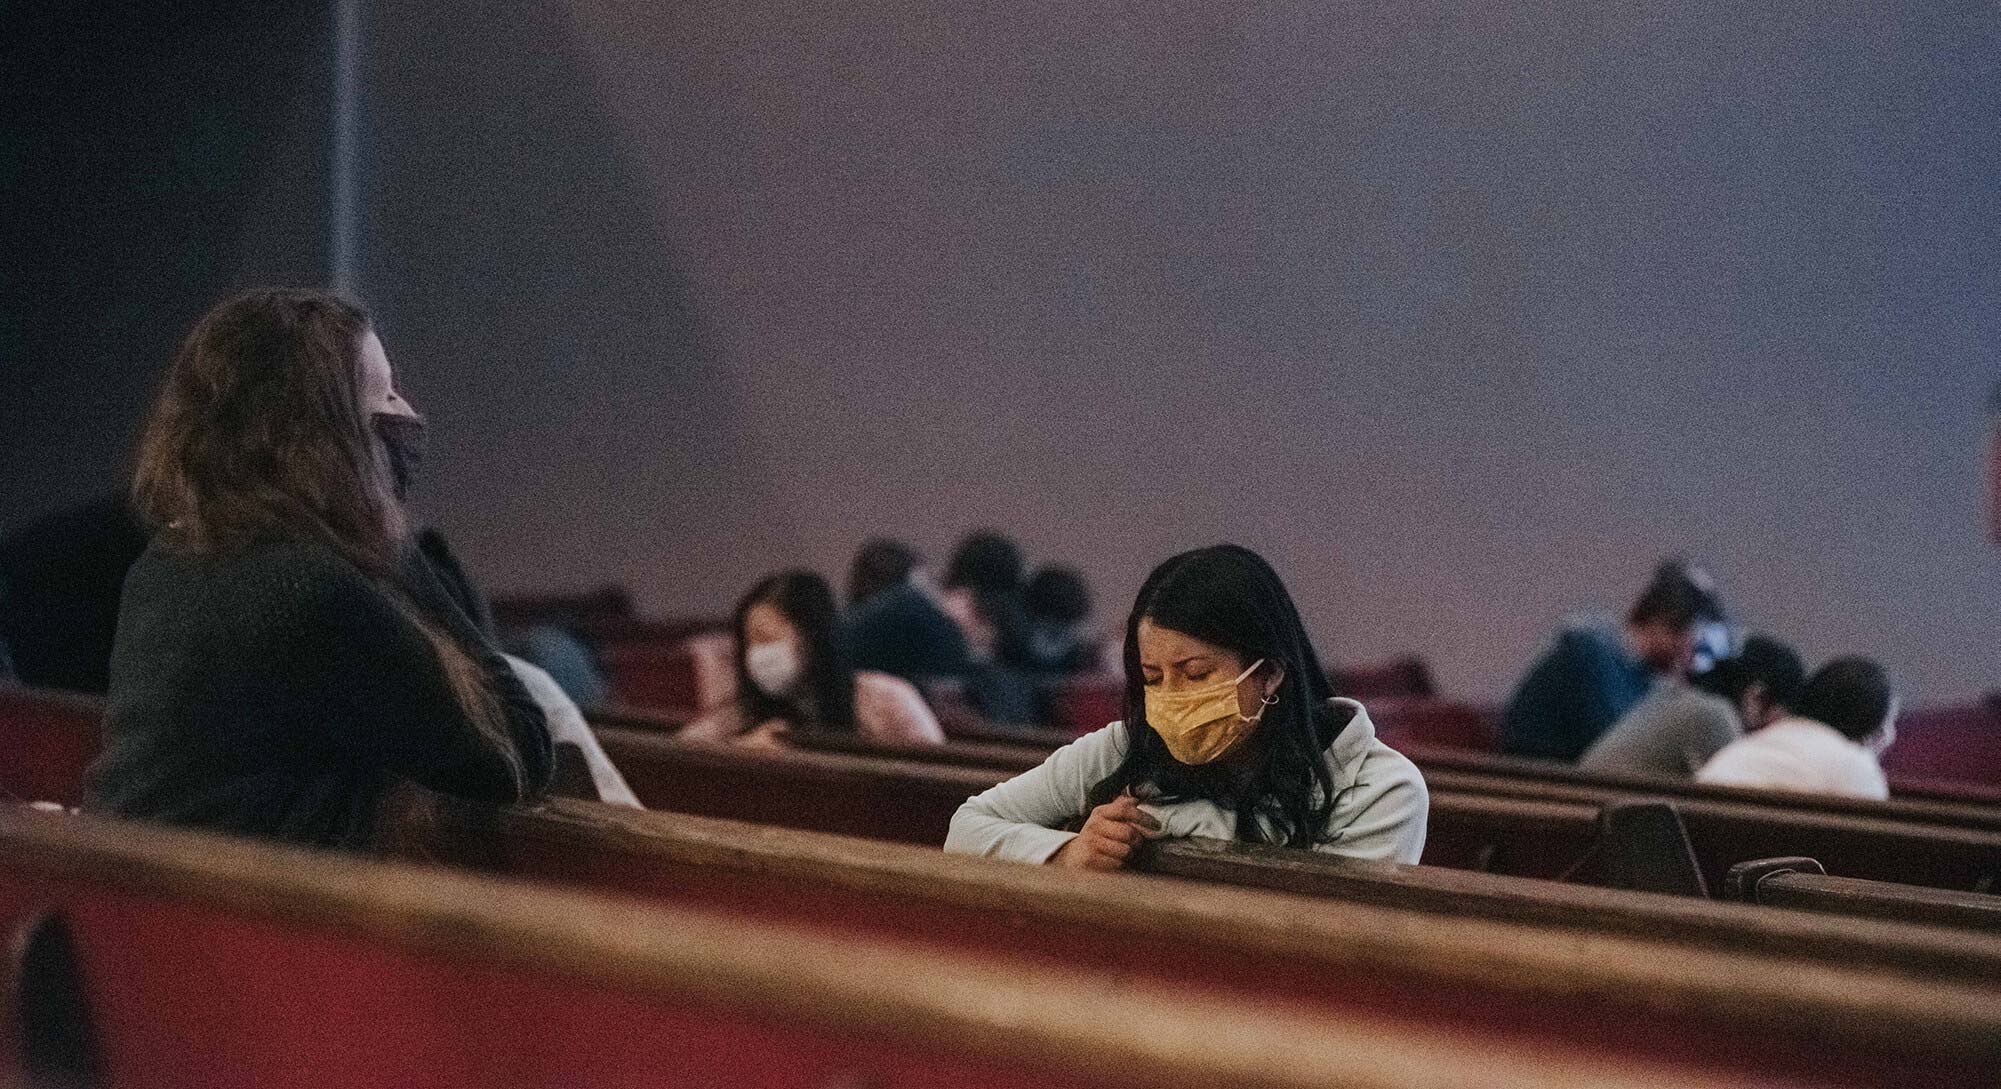 Coquitlam Alliance Church. Two masked women praying in a pew.